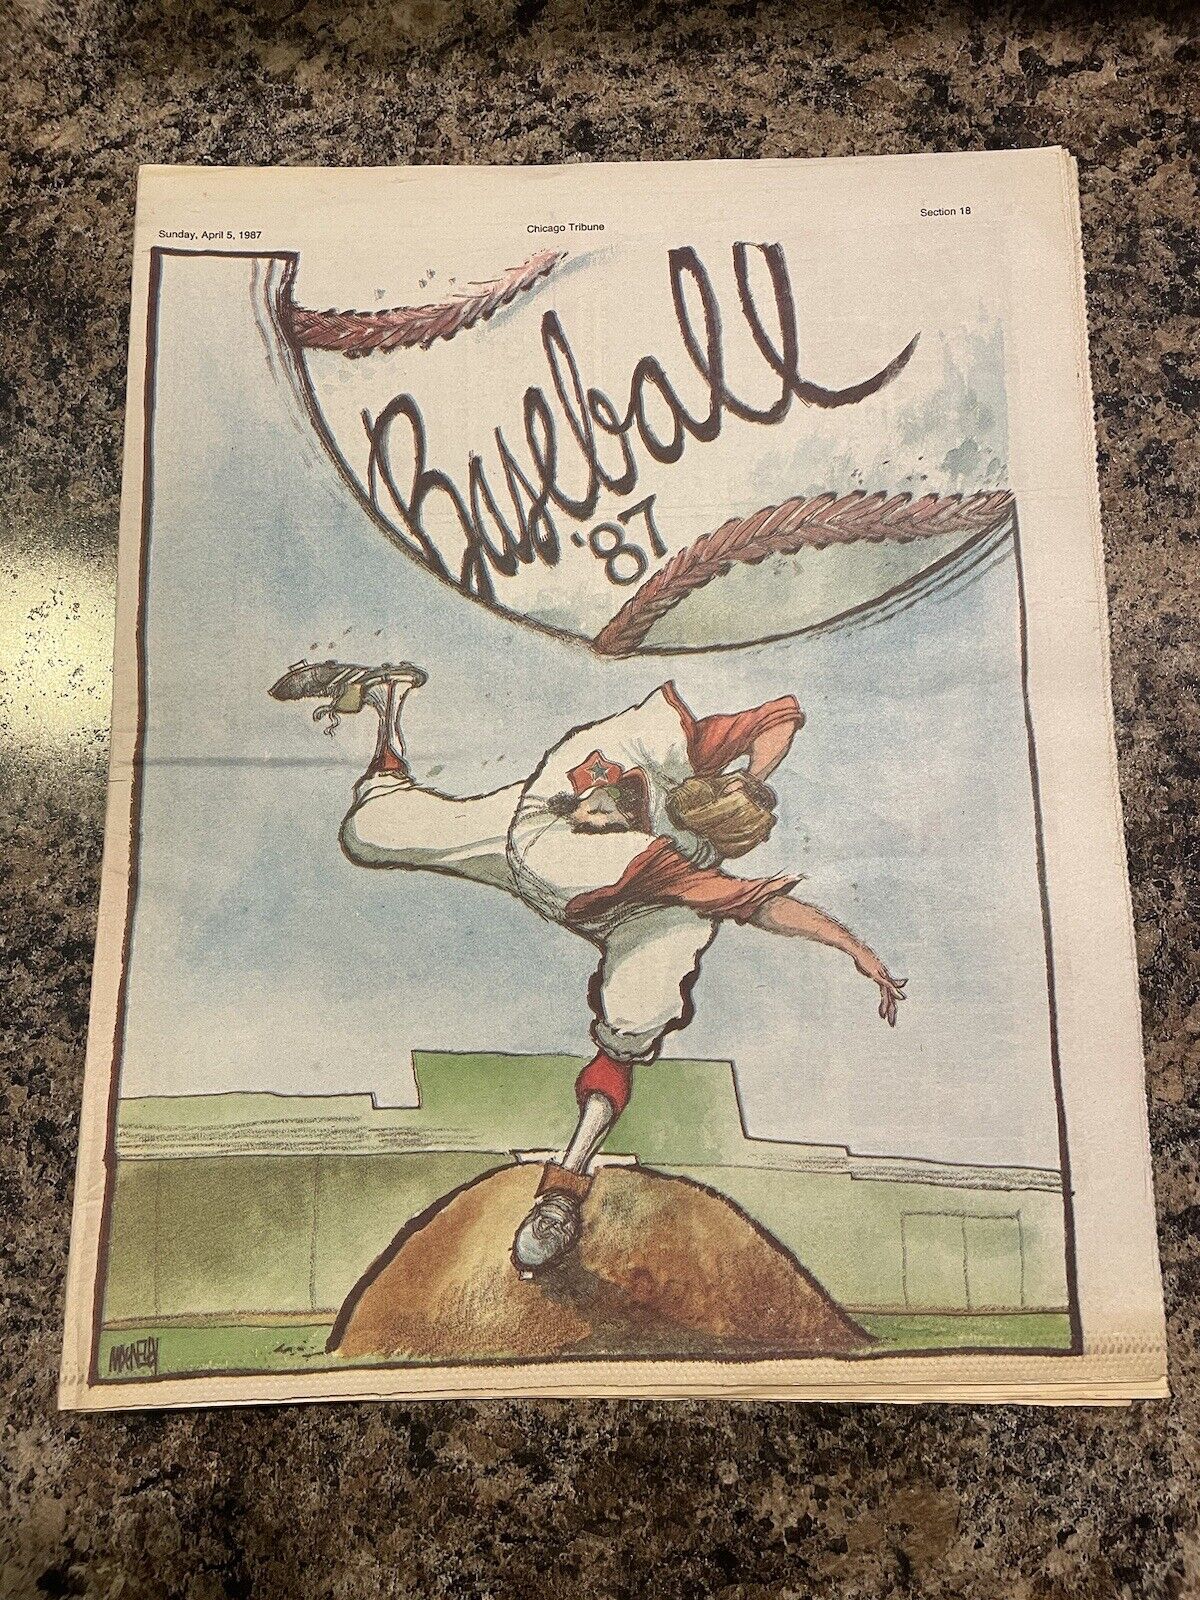 1987 Chicago Cubs & White Sox Baseball Preview Newspaper